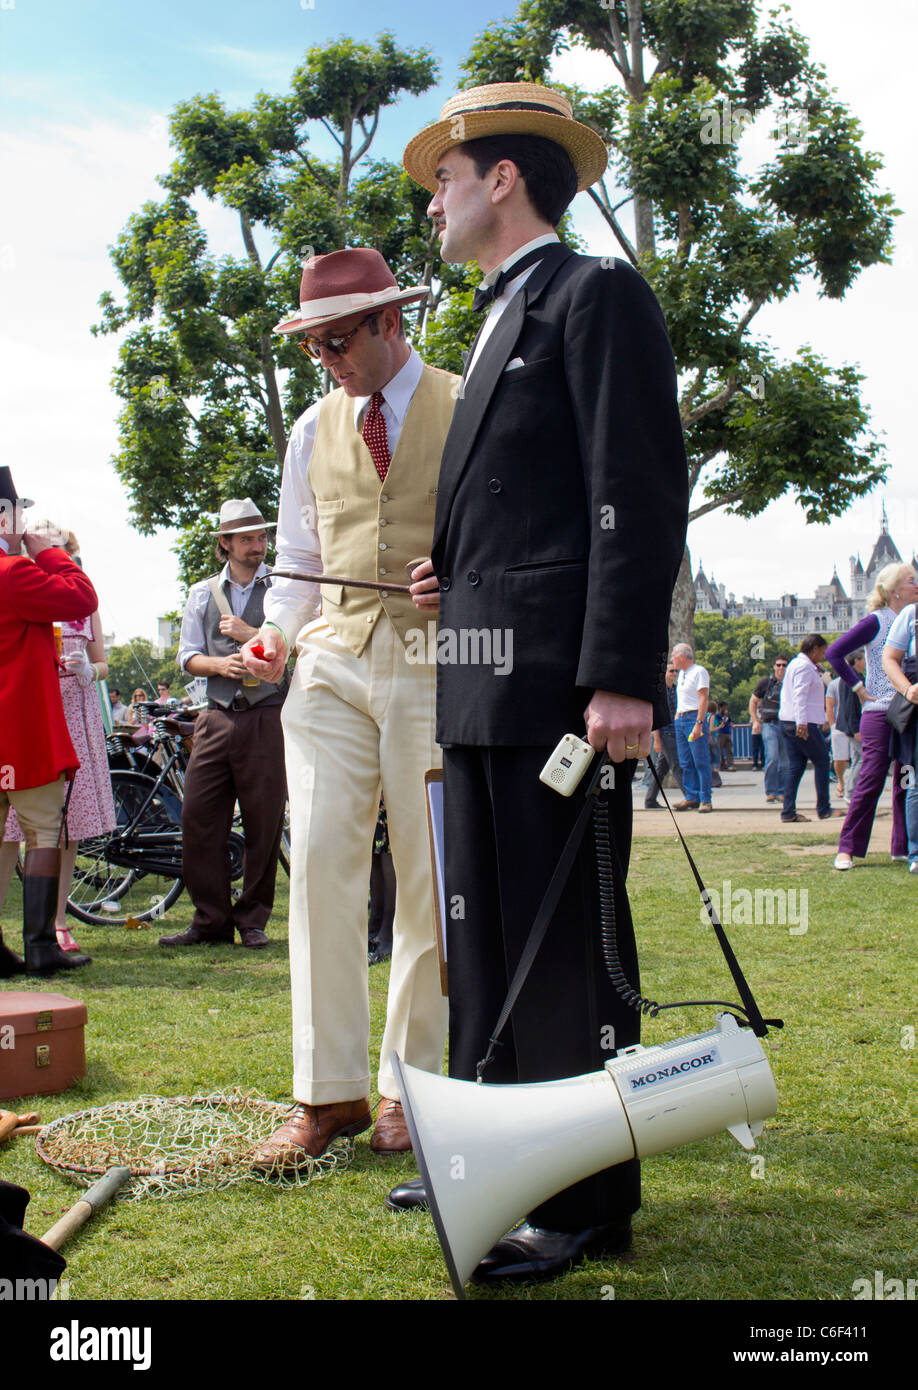 The Chap Olympiad, a spoof of the Olympics featuring louche costumes - Vintage festival 2011 in London's Southbank Centre. Stock Photo